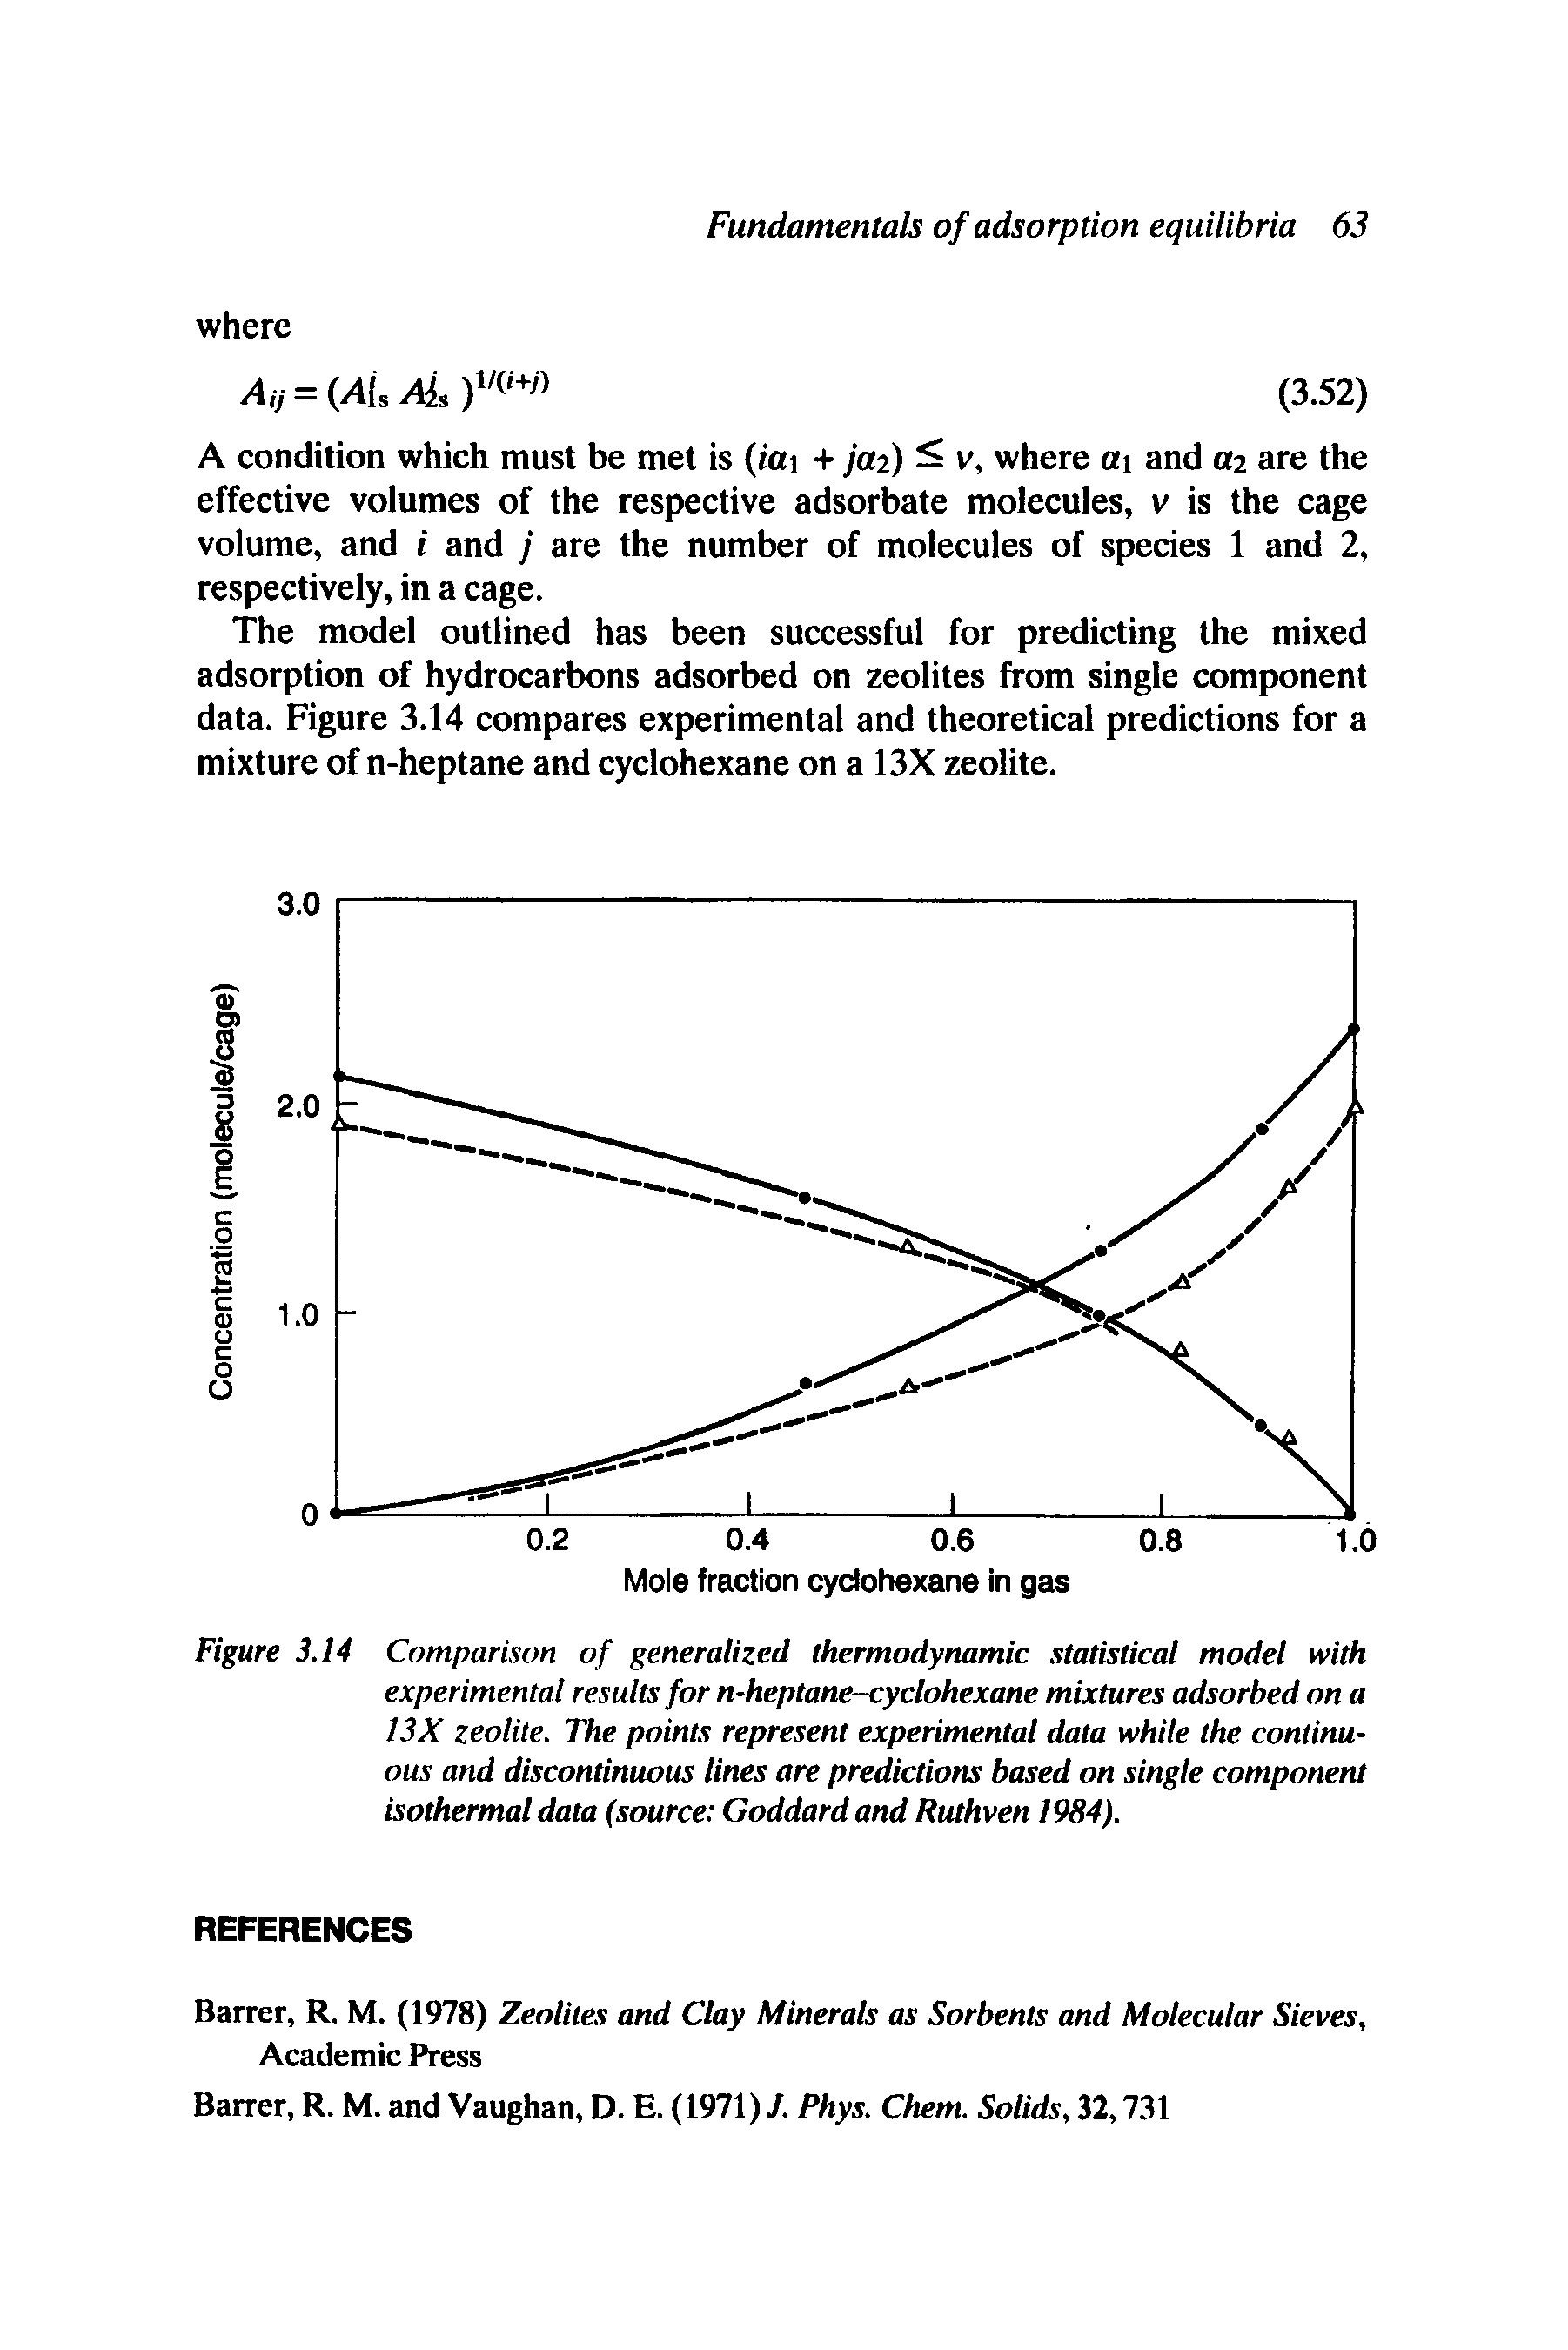 Figure 3.14 Comparison of generalized thermodynamic. statistical model with experimental results for n-heptane-cyclohexane mixtures adsorbed on a 13X zeolite. The points represent experimental data while the continuous and discontinuous lines are predictions based on single component isothermal data (source Goddard and Ruthven 1984).